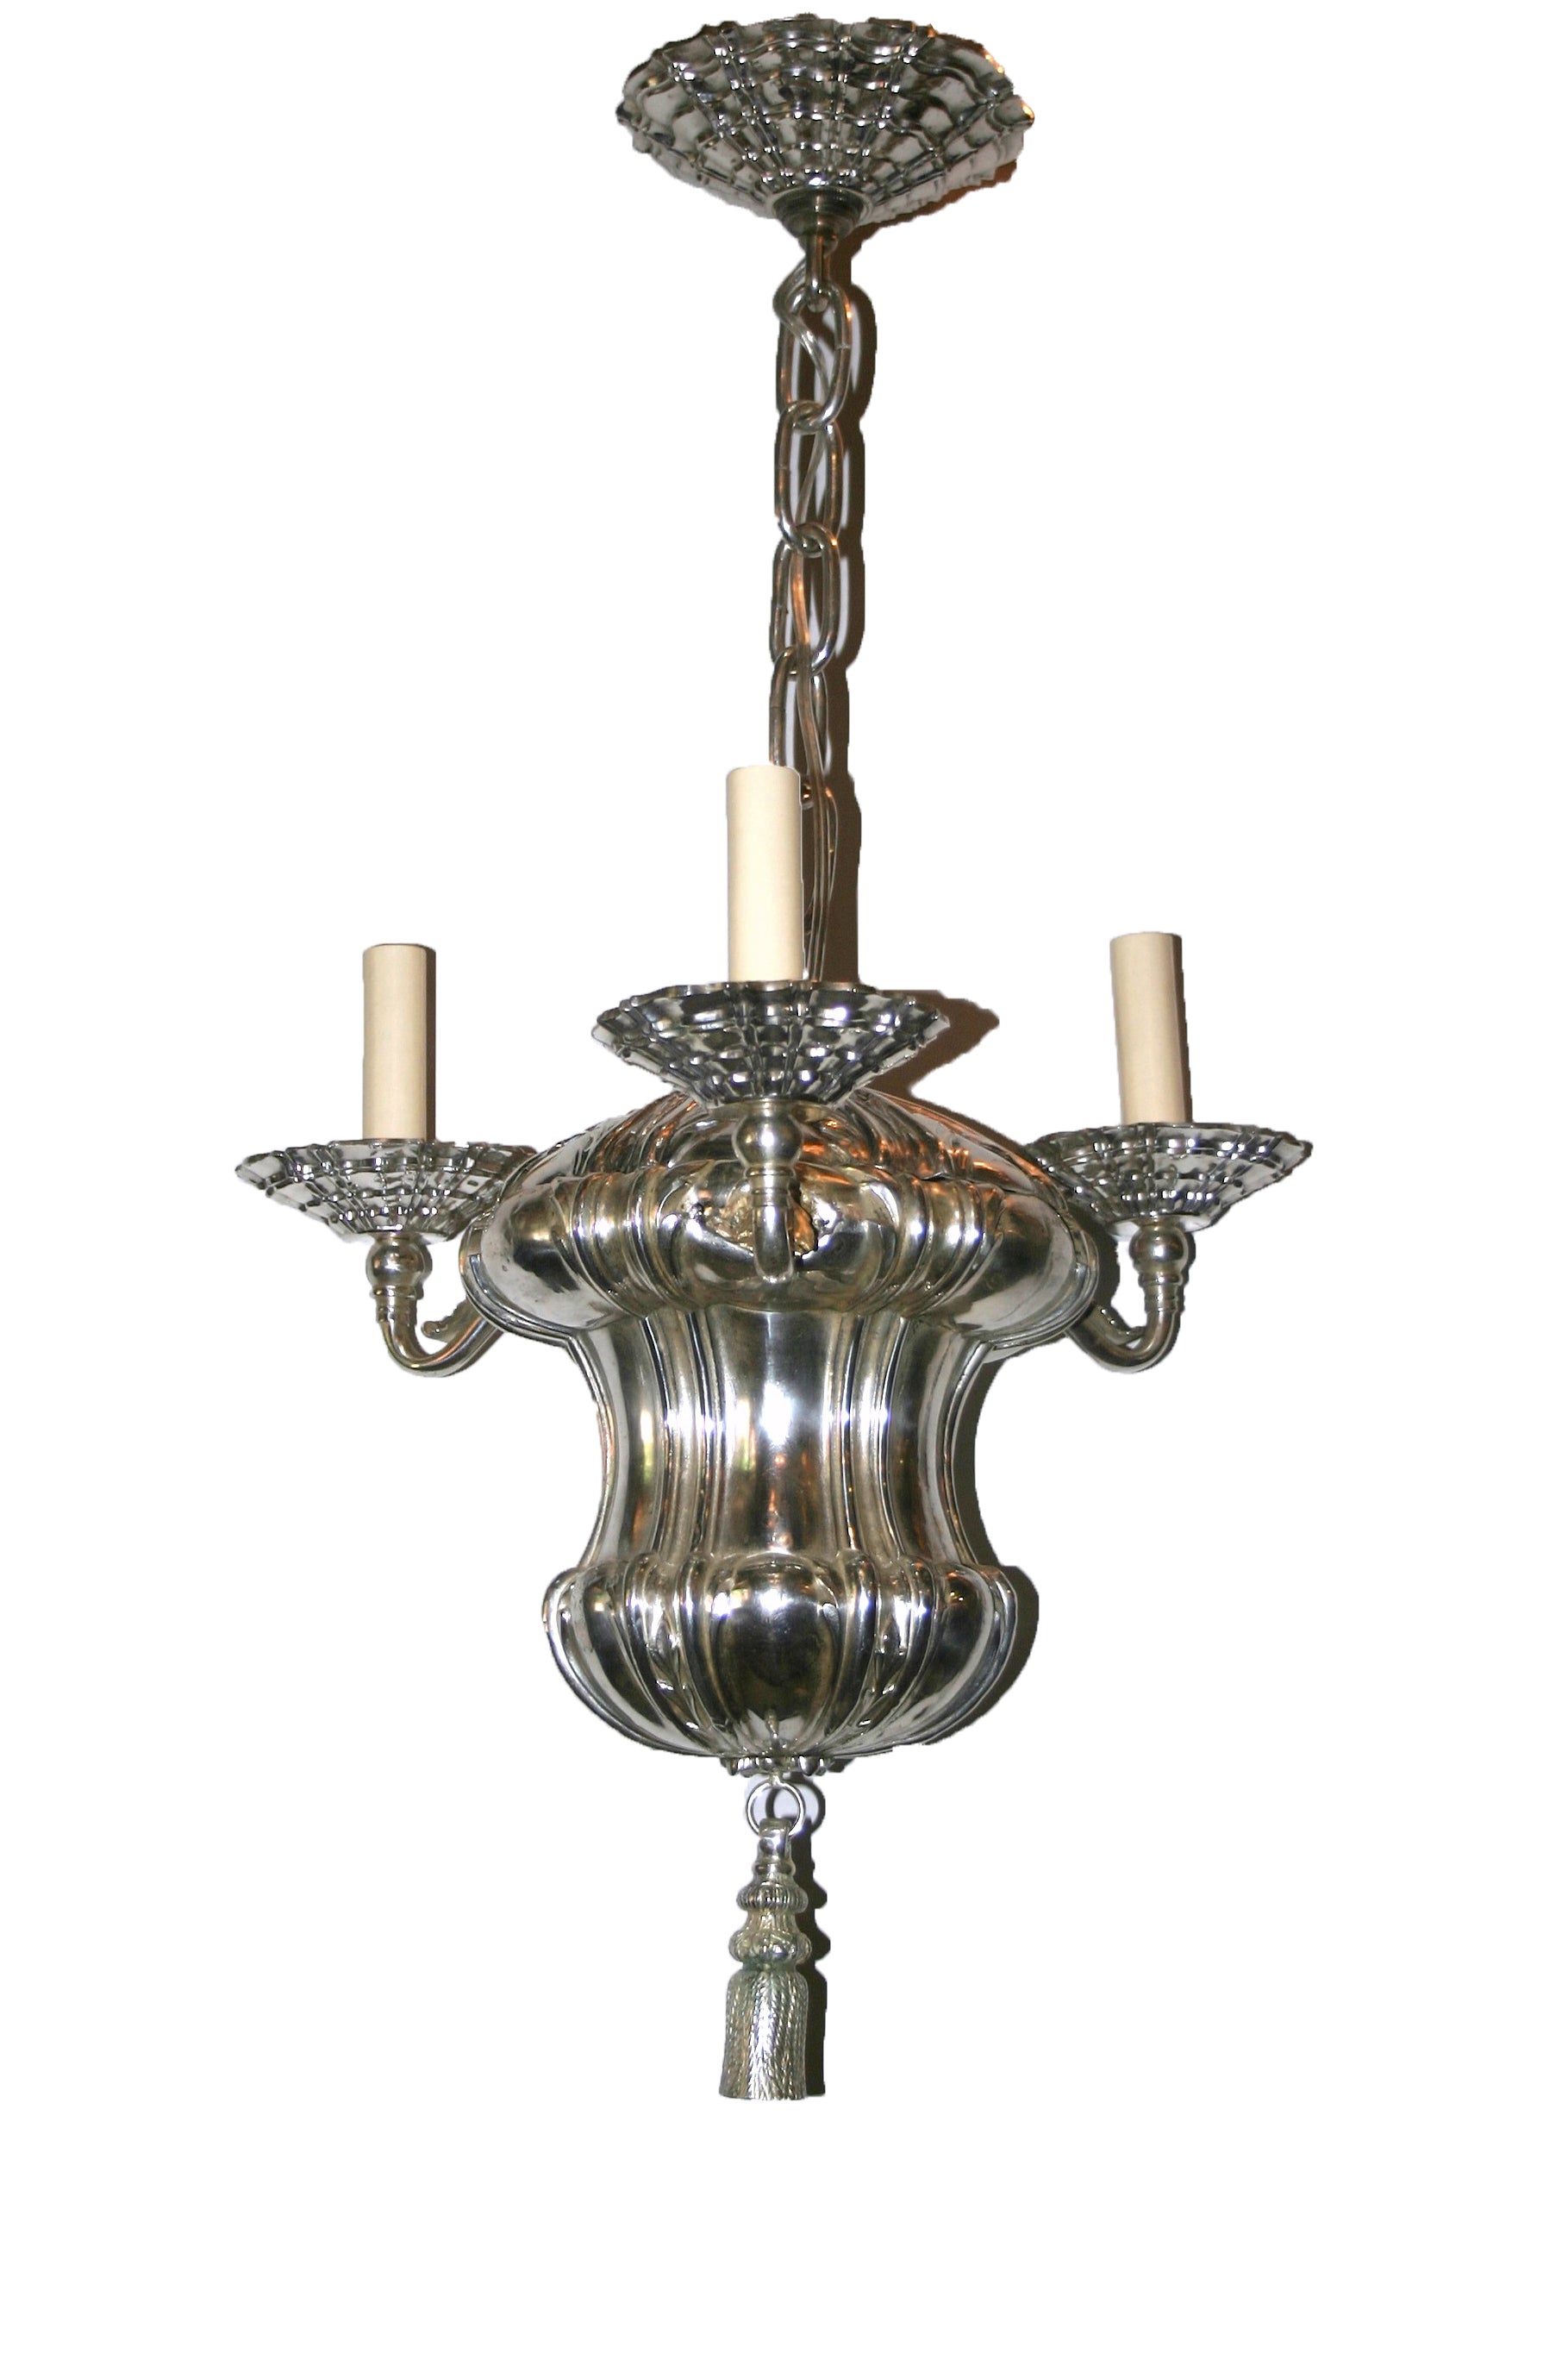 Set of Neoclassic Silver Plated Chandeliers, Sold Individually